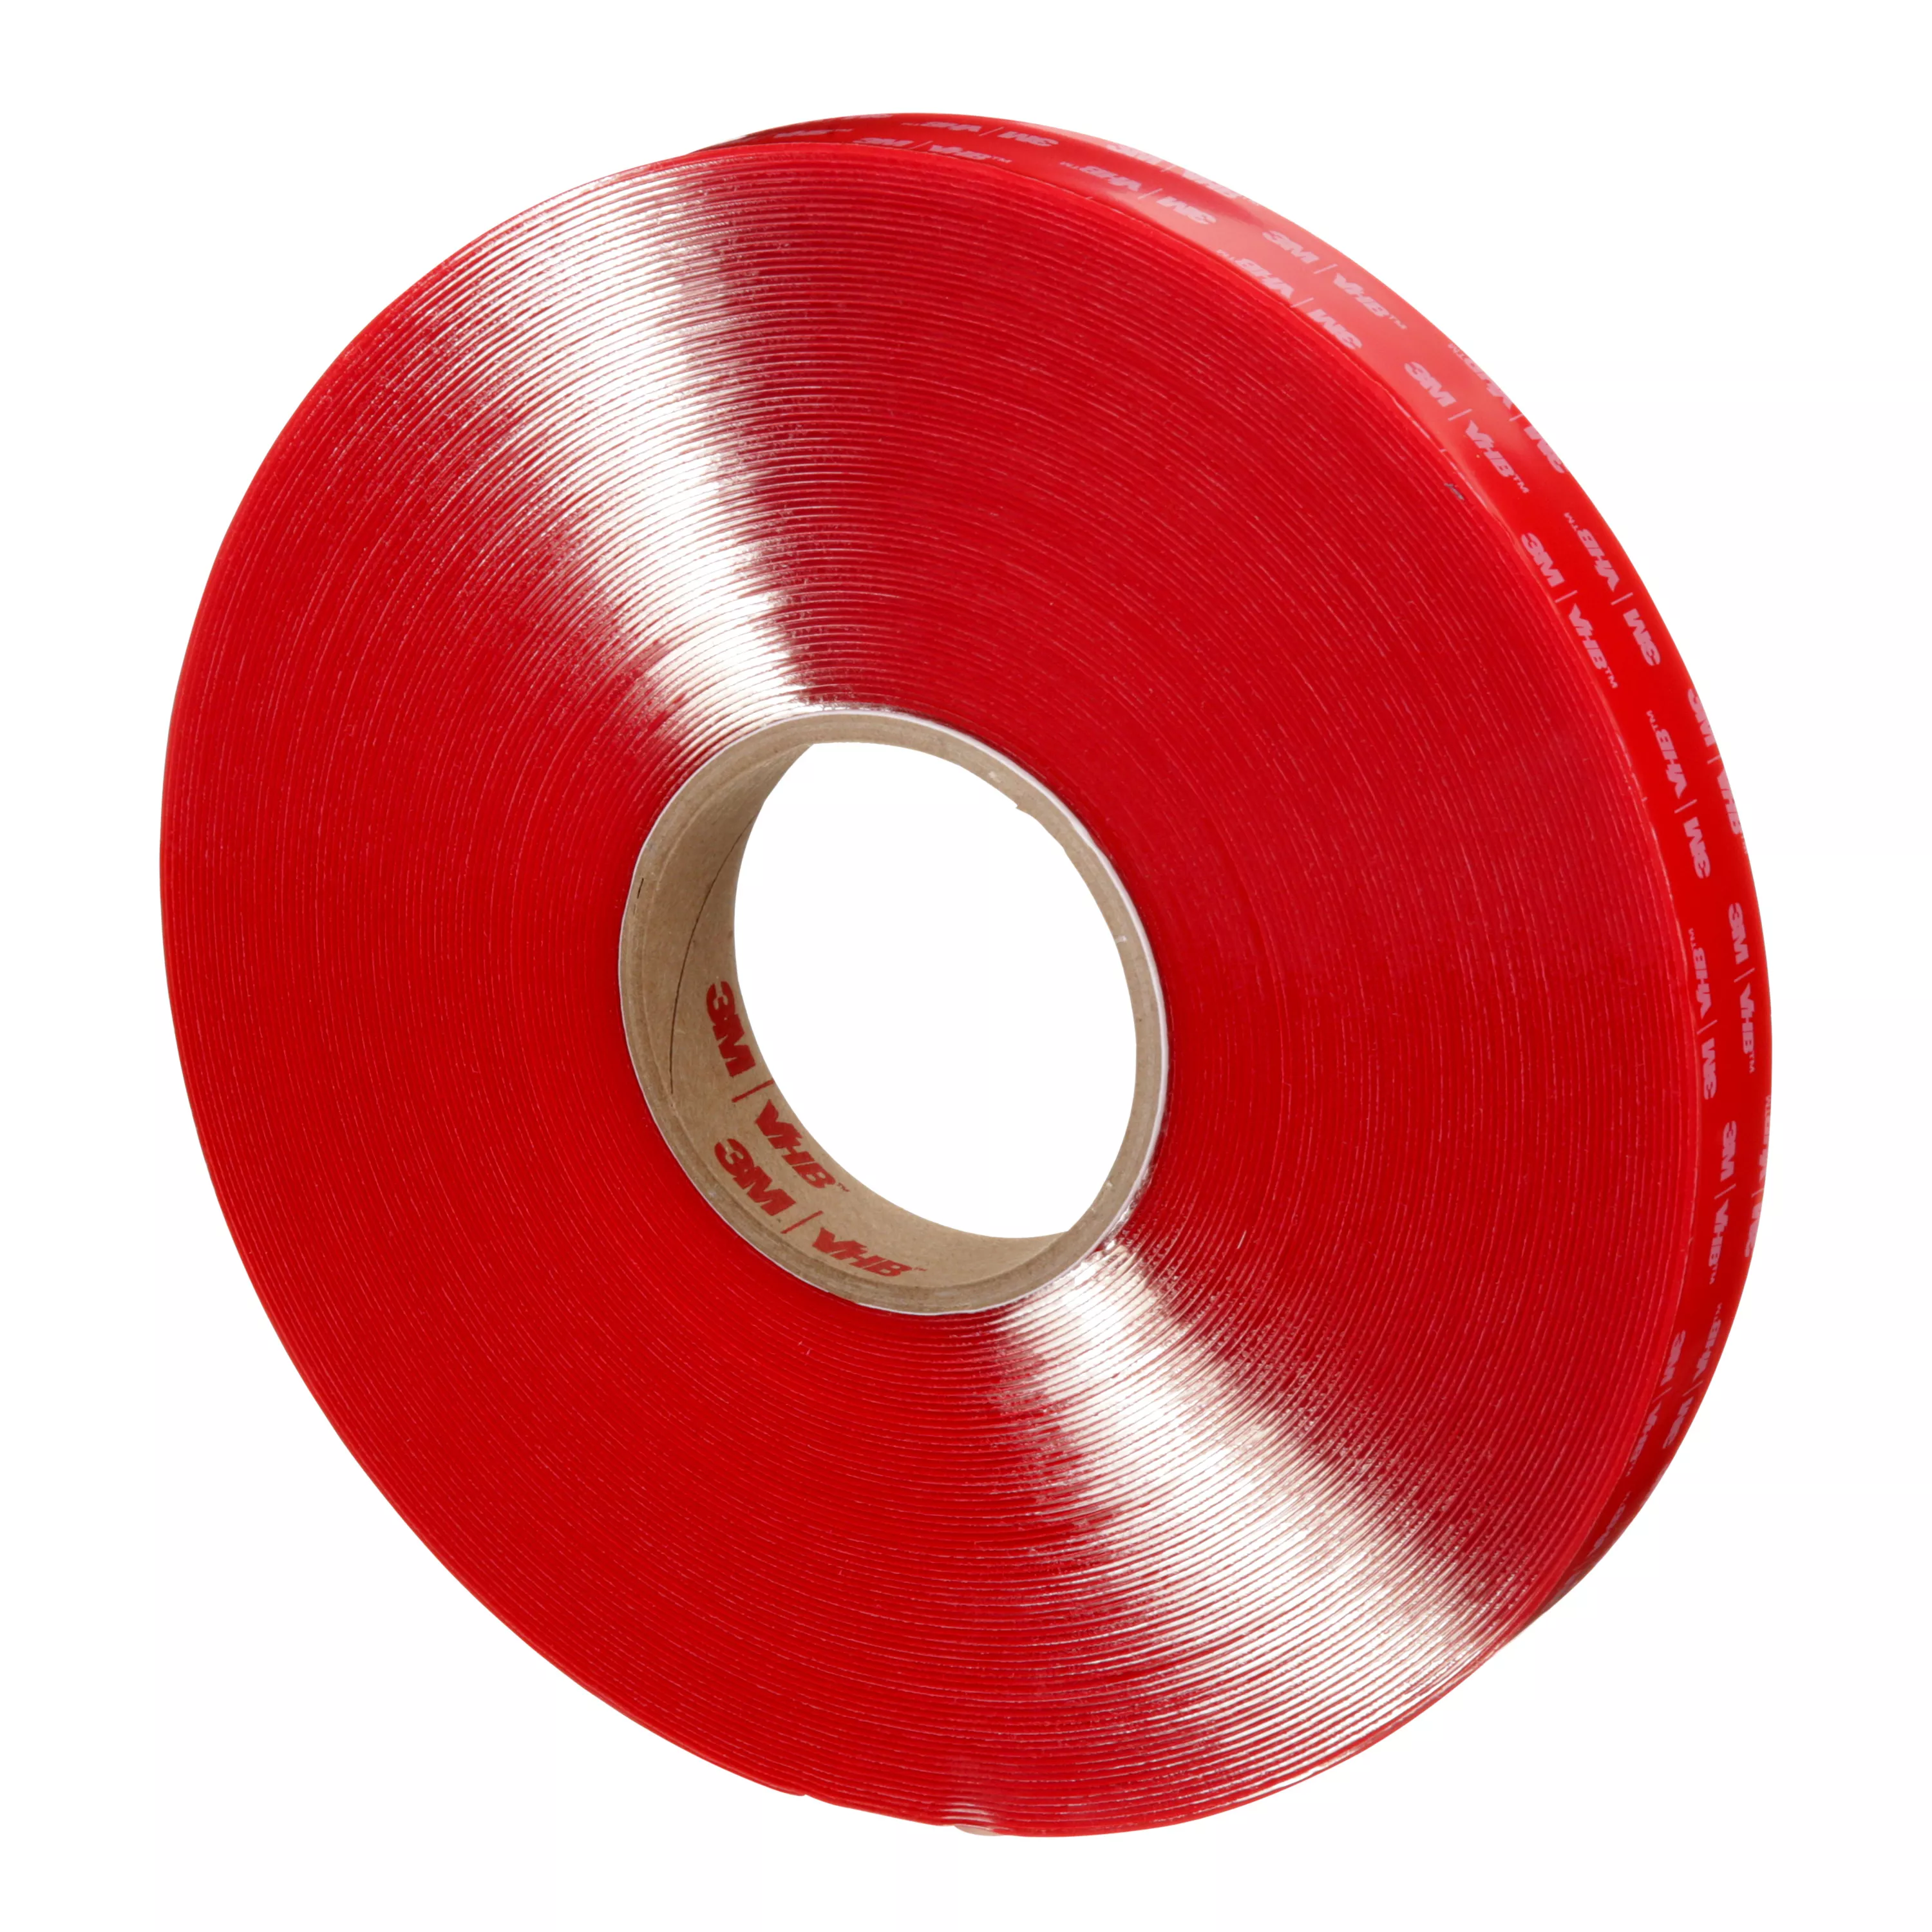 Product Number 4905 | 3M™ VHB™ Tape 4905